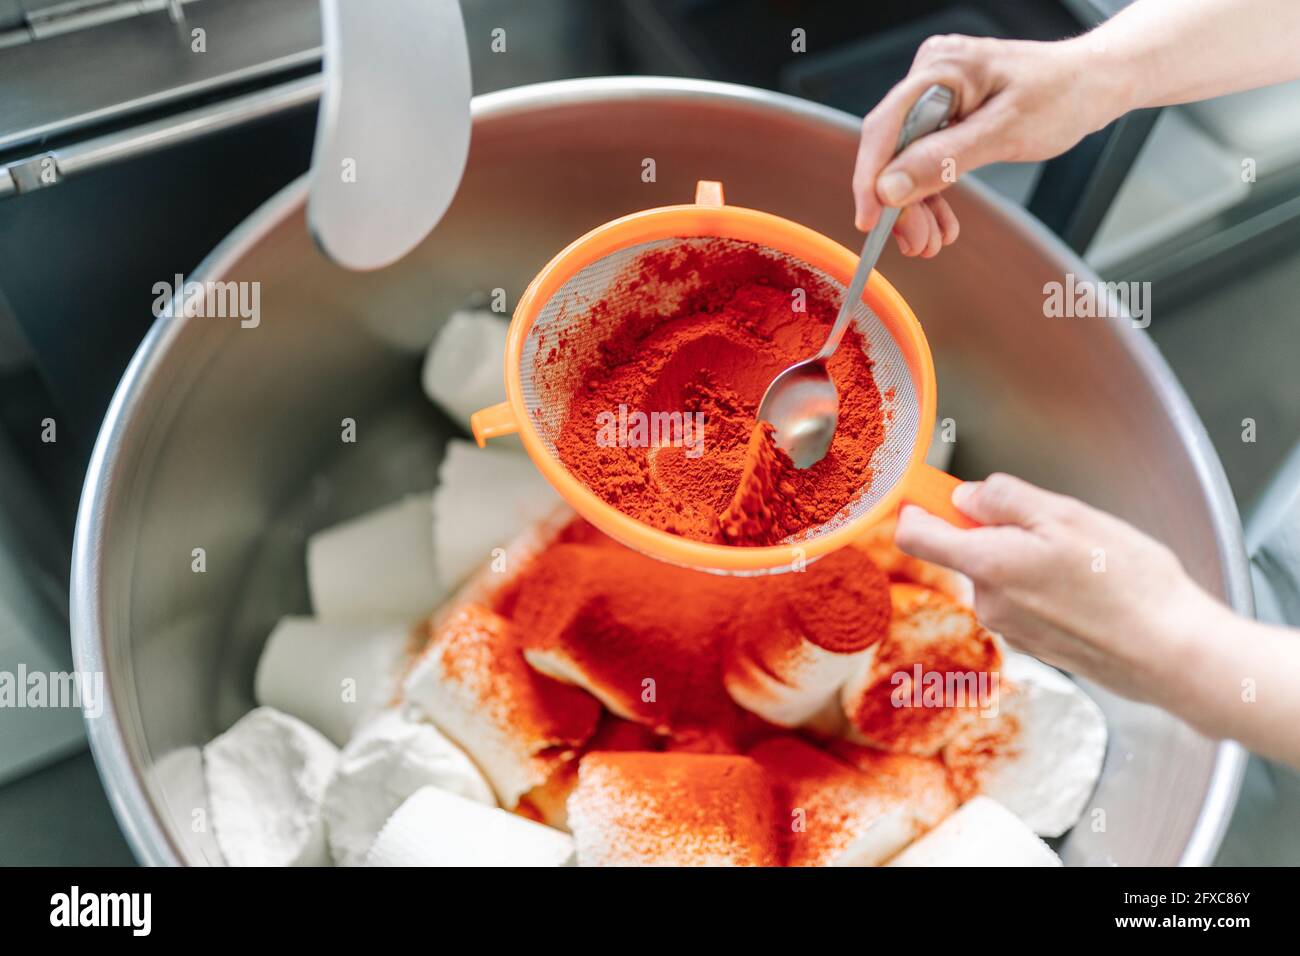 Woman putting red ingredient through strainer in container Stock Photo